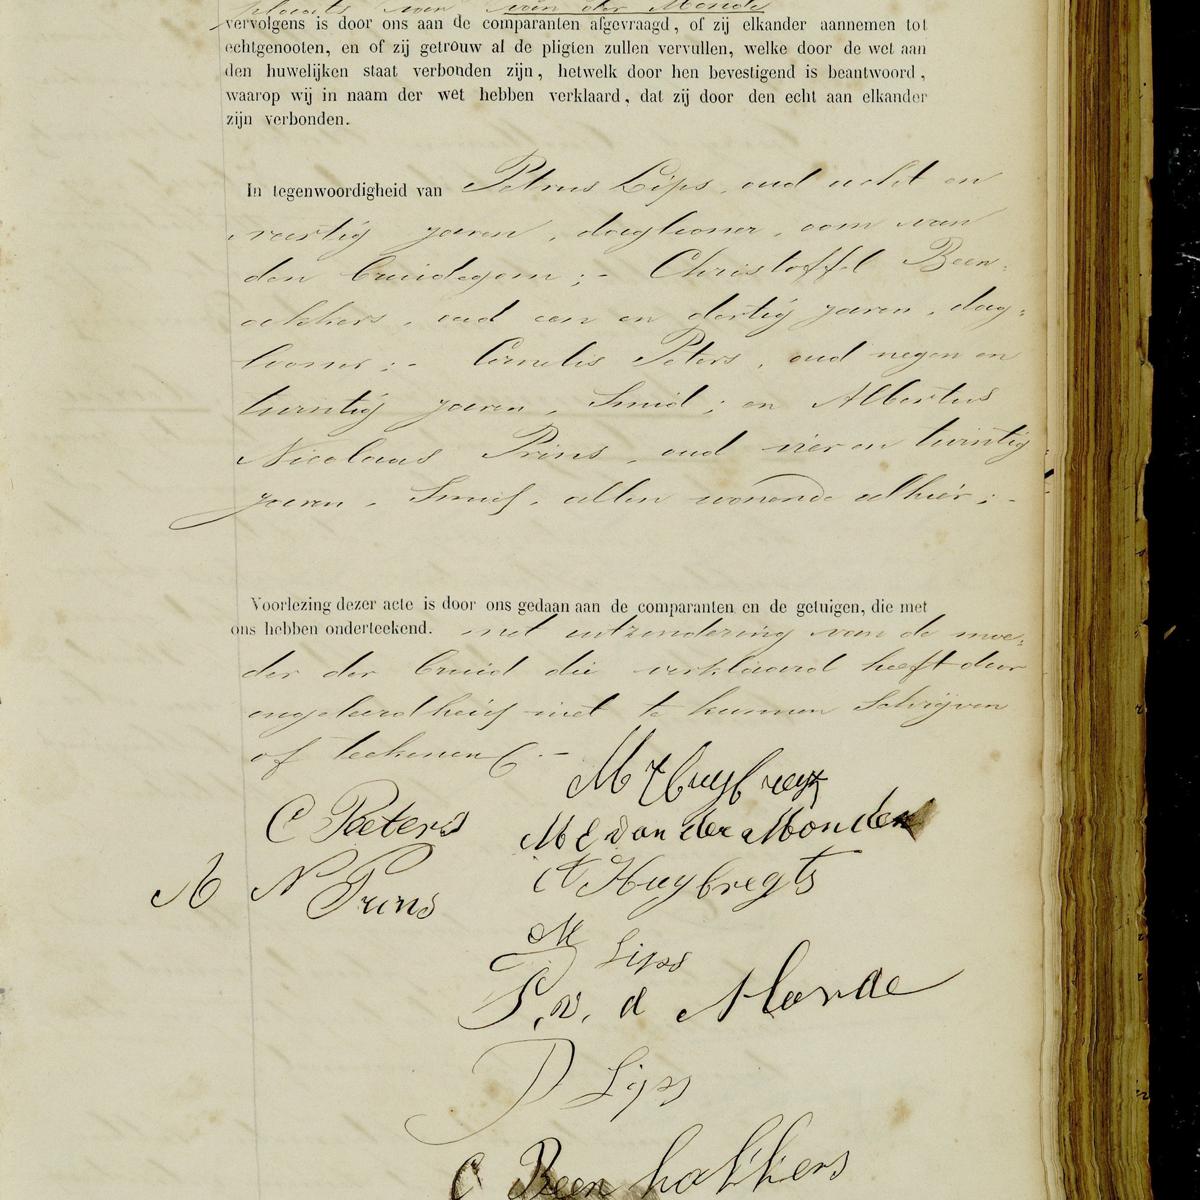 Civil registry of marriages, Breda, 1884, record 85, right page